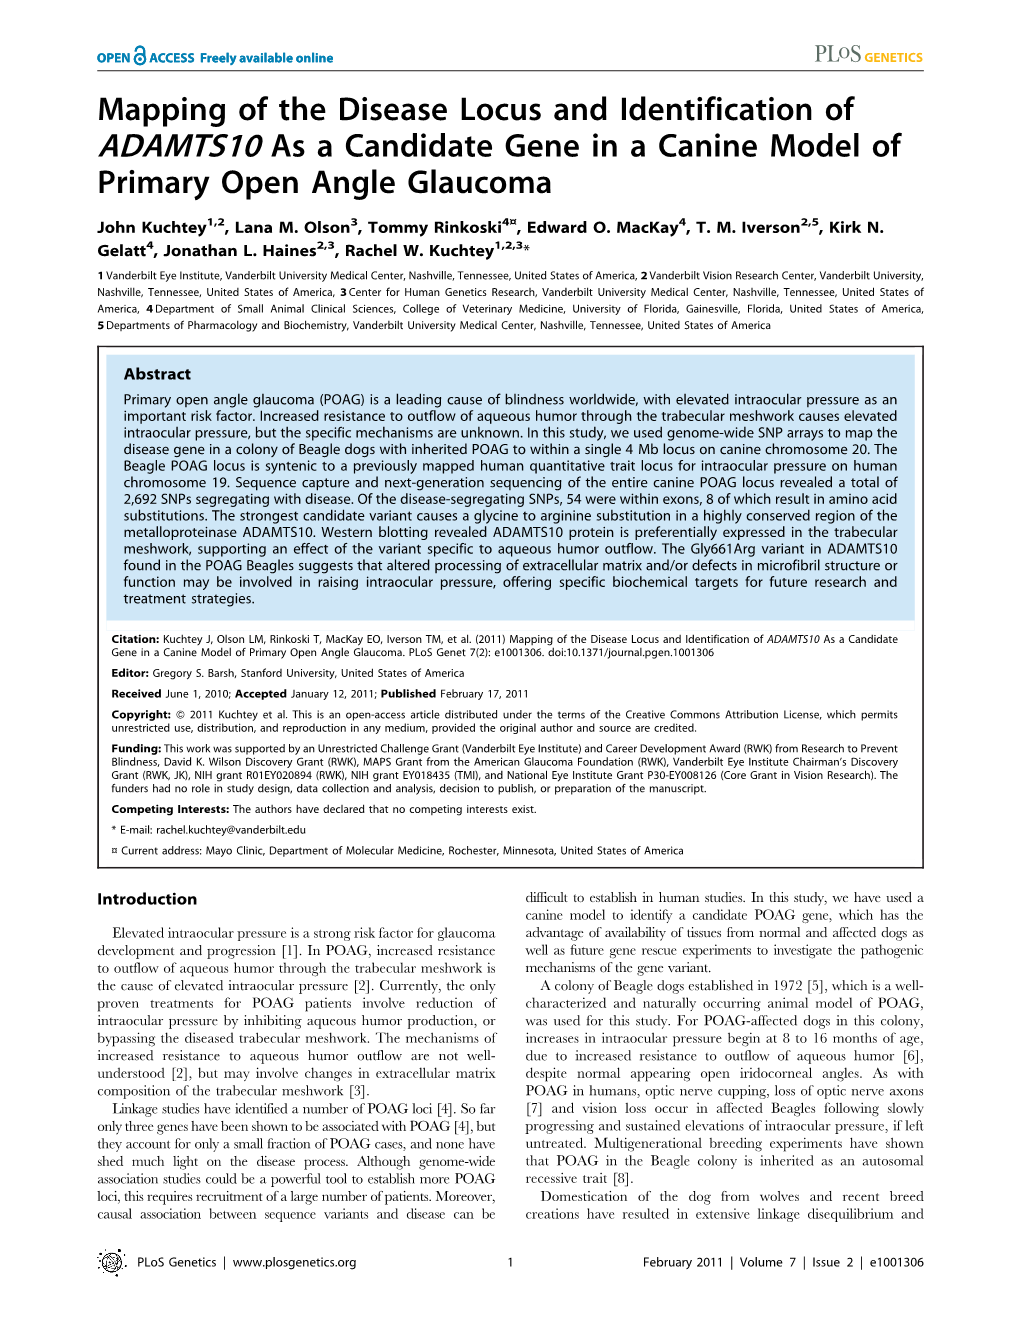 ADAMTS10 As a Candidate Gene in a Canine Model of Primary Open Angle Glaucoma